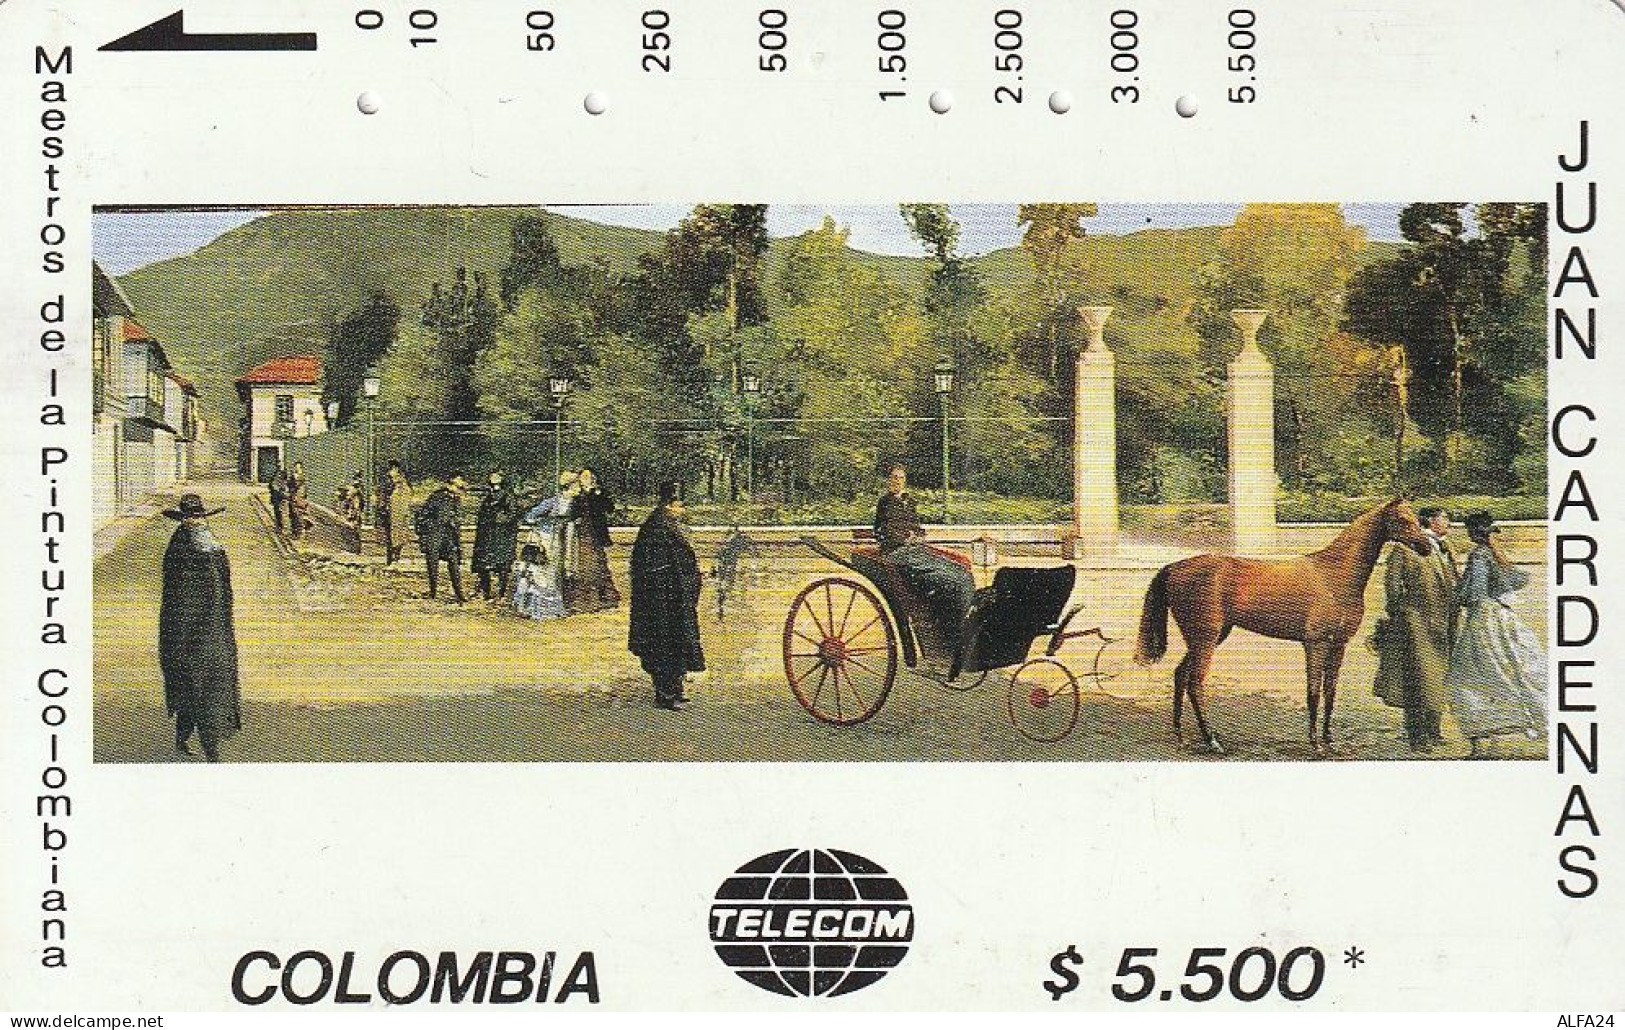 PHONE CARD COLOMBIA  (E57.21.1 - Colombie